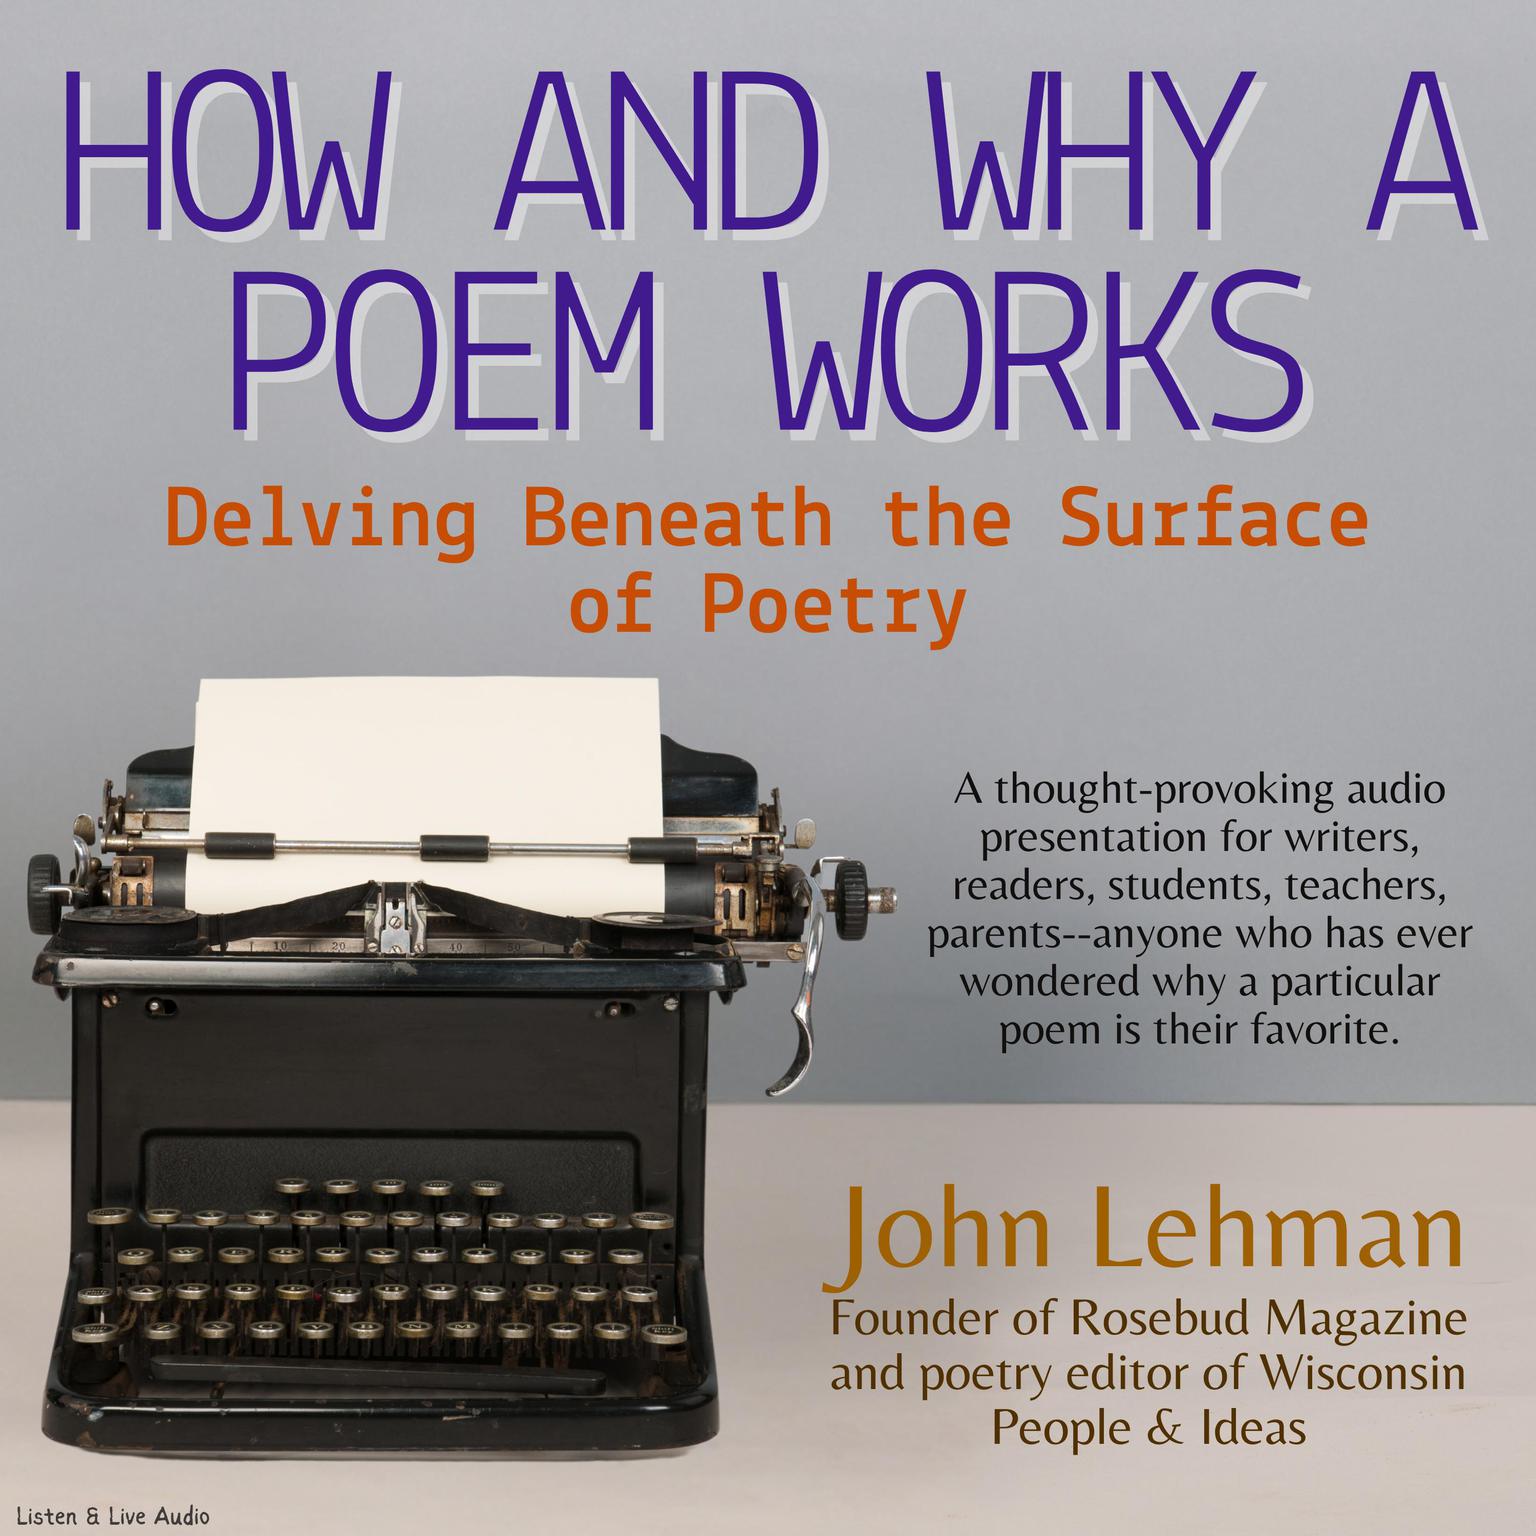 How And Why A Poem Works Audiobook, by John Lehman